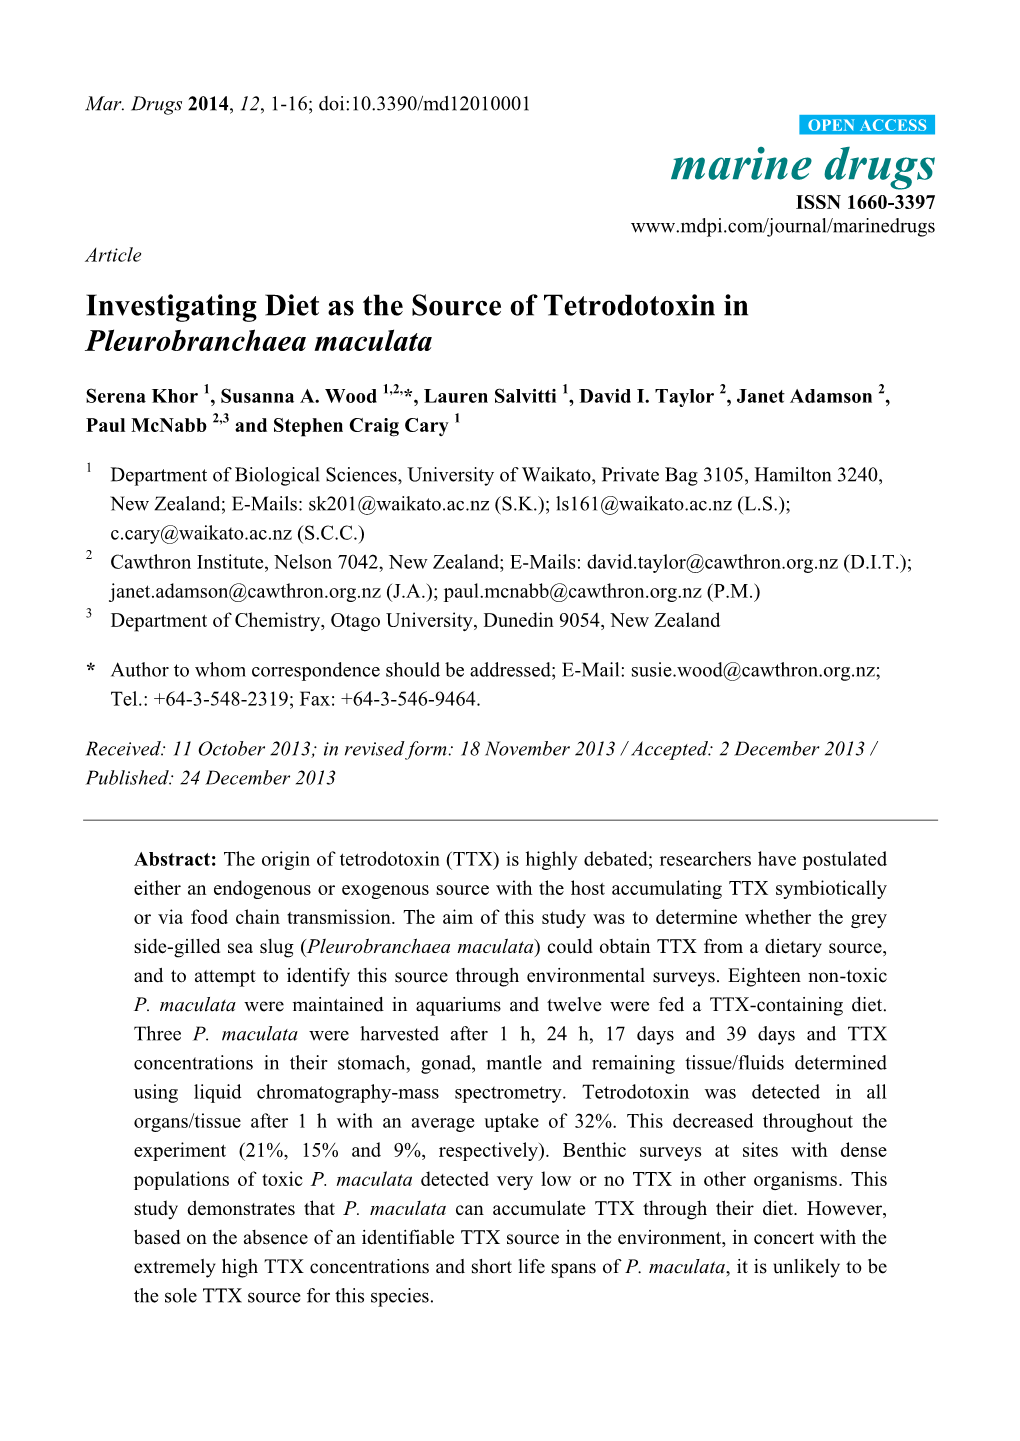 Investigating Diet As the Source of Tetrodotoxin in Pleurobranchaea Maculata